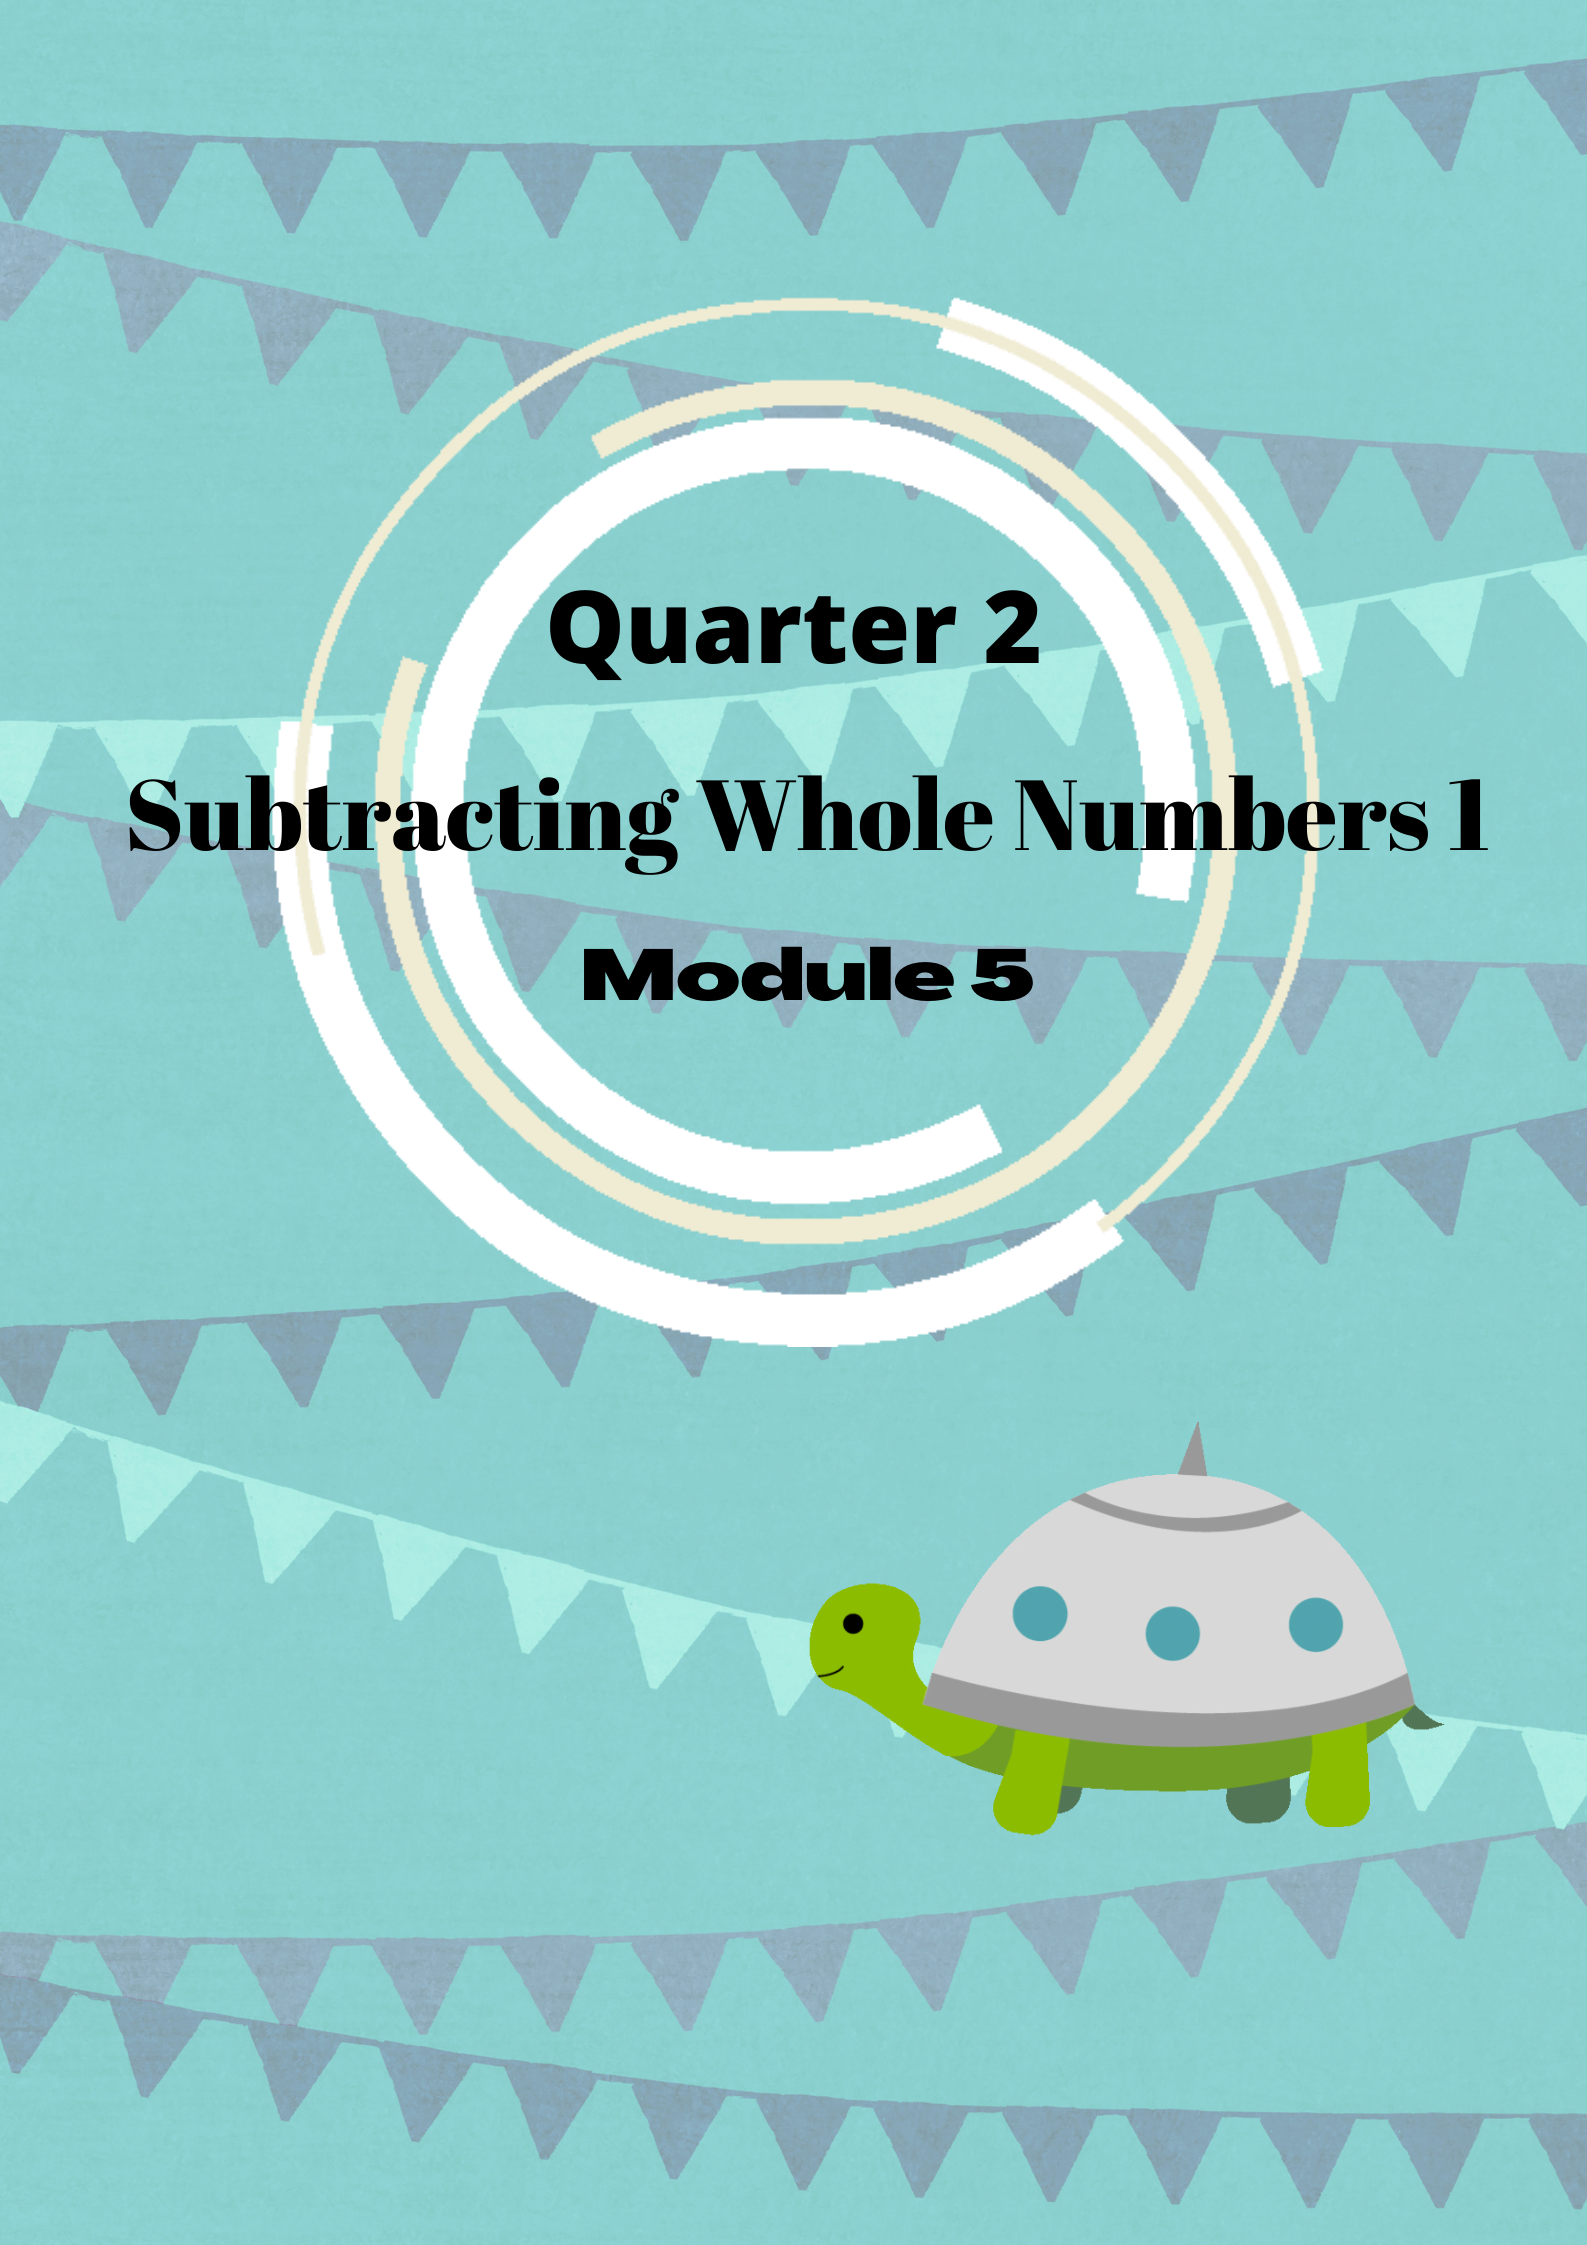 SUBTRACTING WHOLE NUMBERS 1